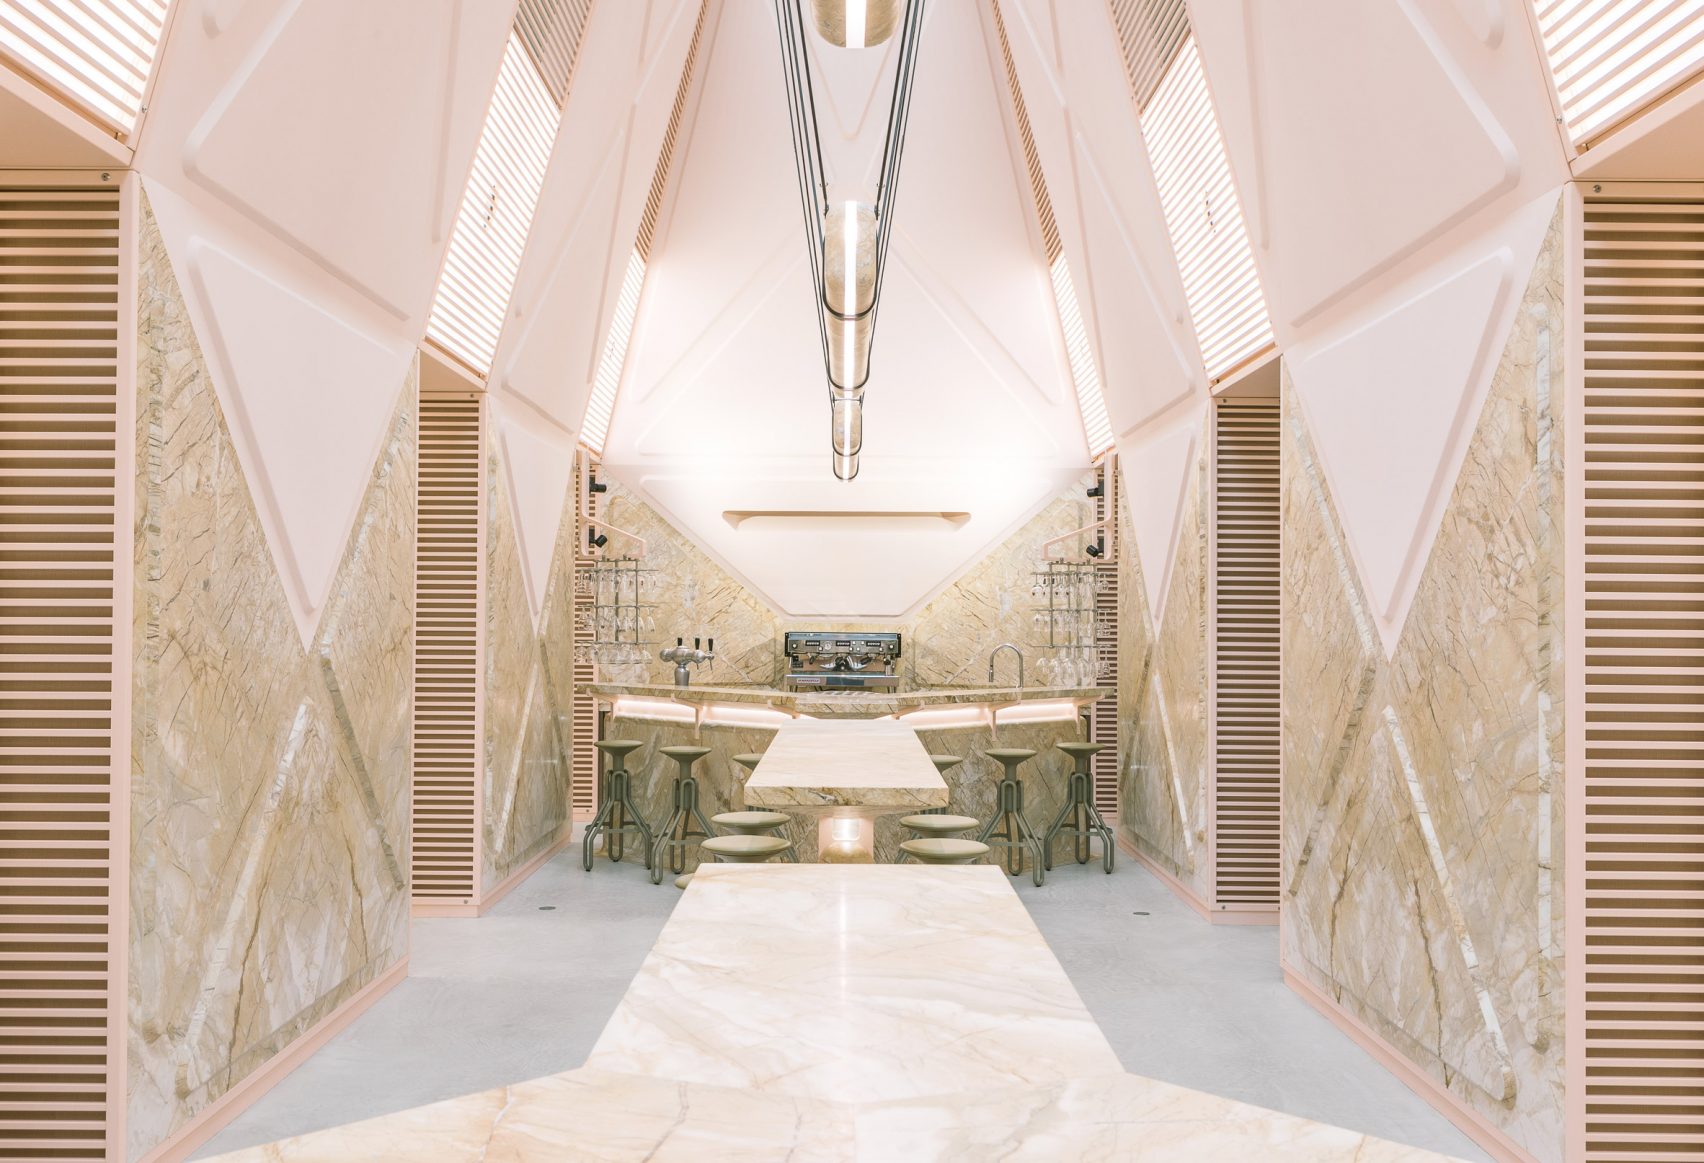 This lounge in Belgium is clad head to toe in pink marble, with a design that makes it look pulled straight from a science fiction film. The central space has a soaring ceiling and a pair of communal bars with soft rounded edges, while two rooms sit adjac